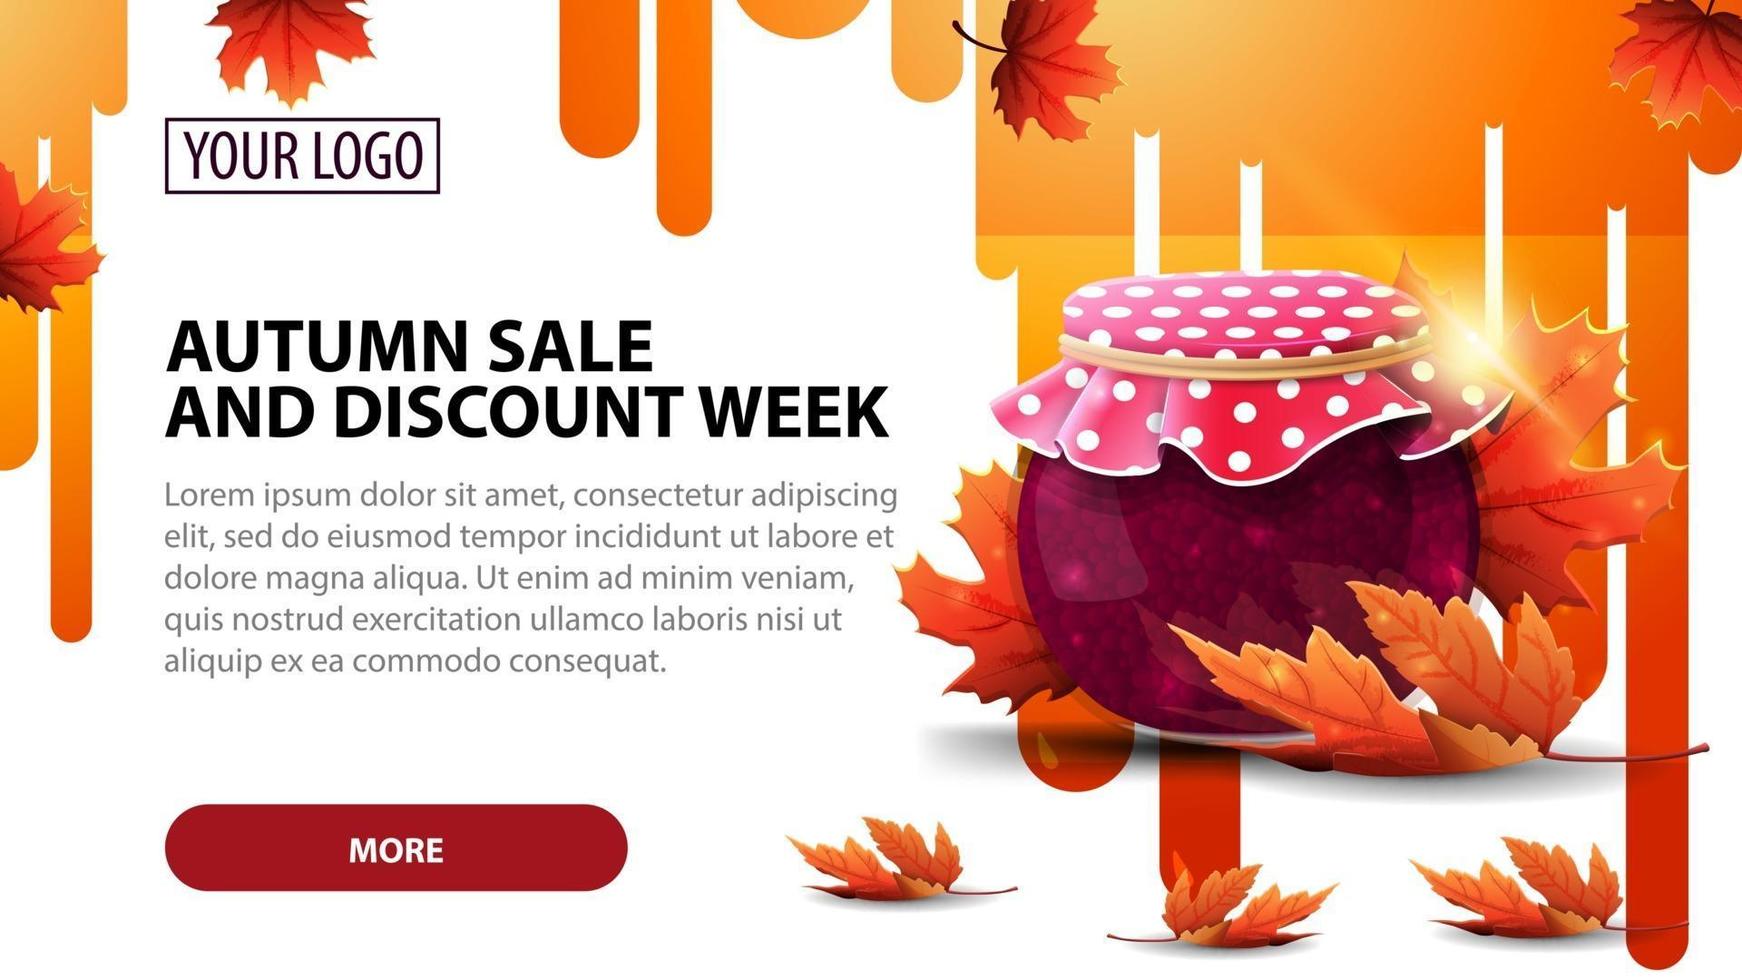 Autumn sale and discount week, banner with jar of jam and maple leaves vector